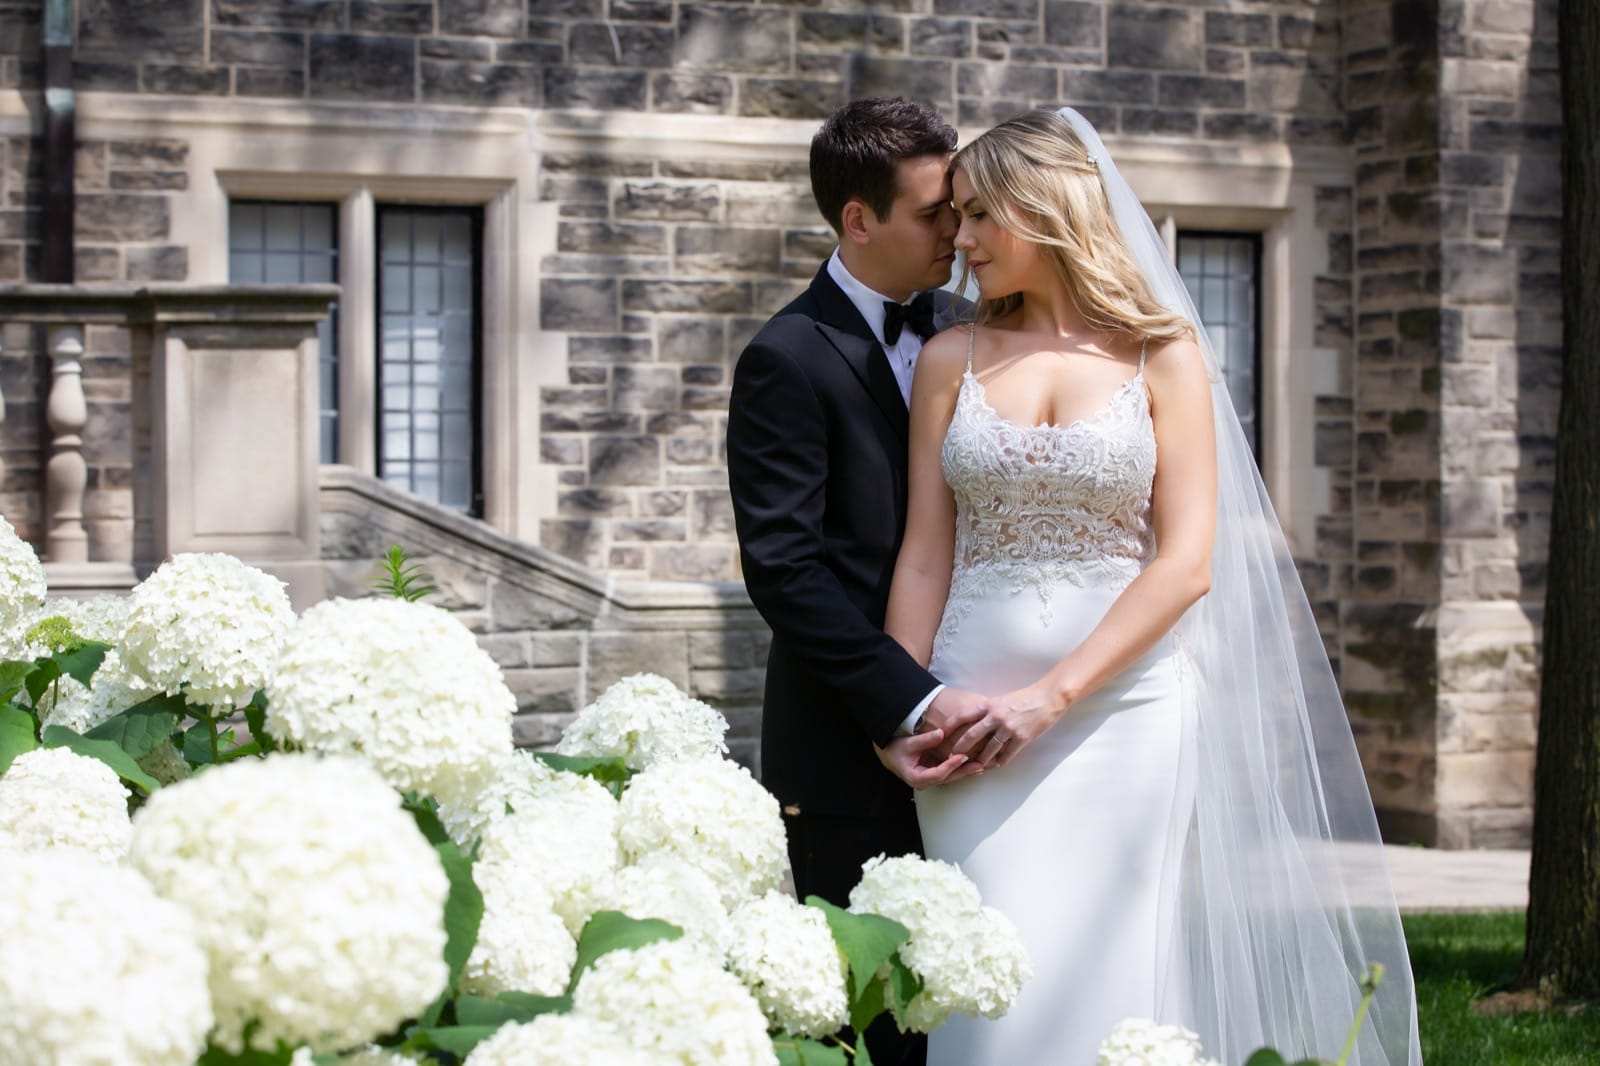 Wedding Photography at the Gardiner Museum in Toronto